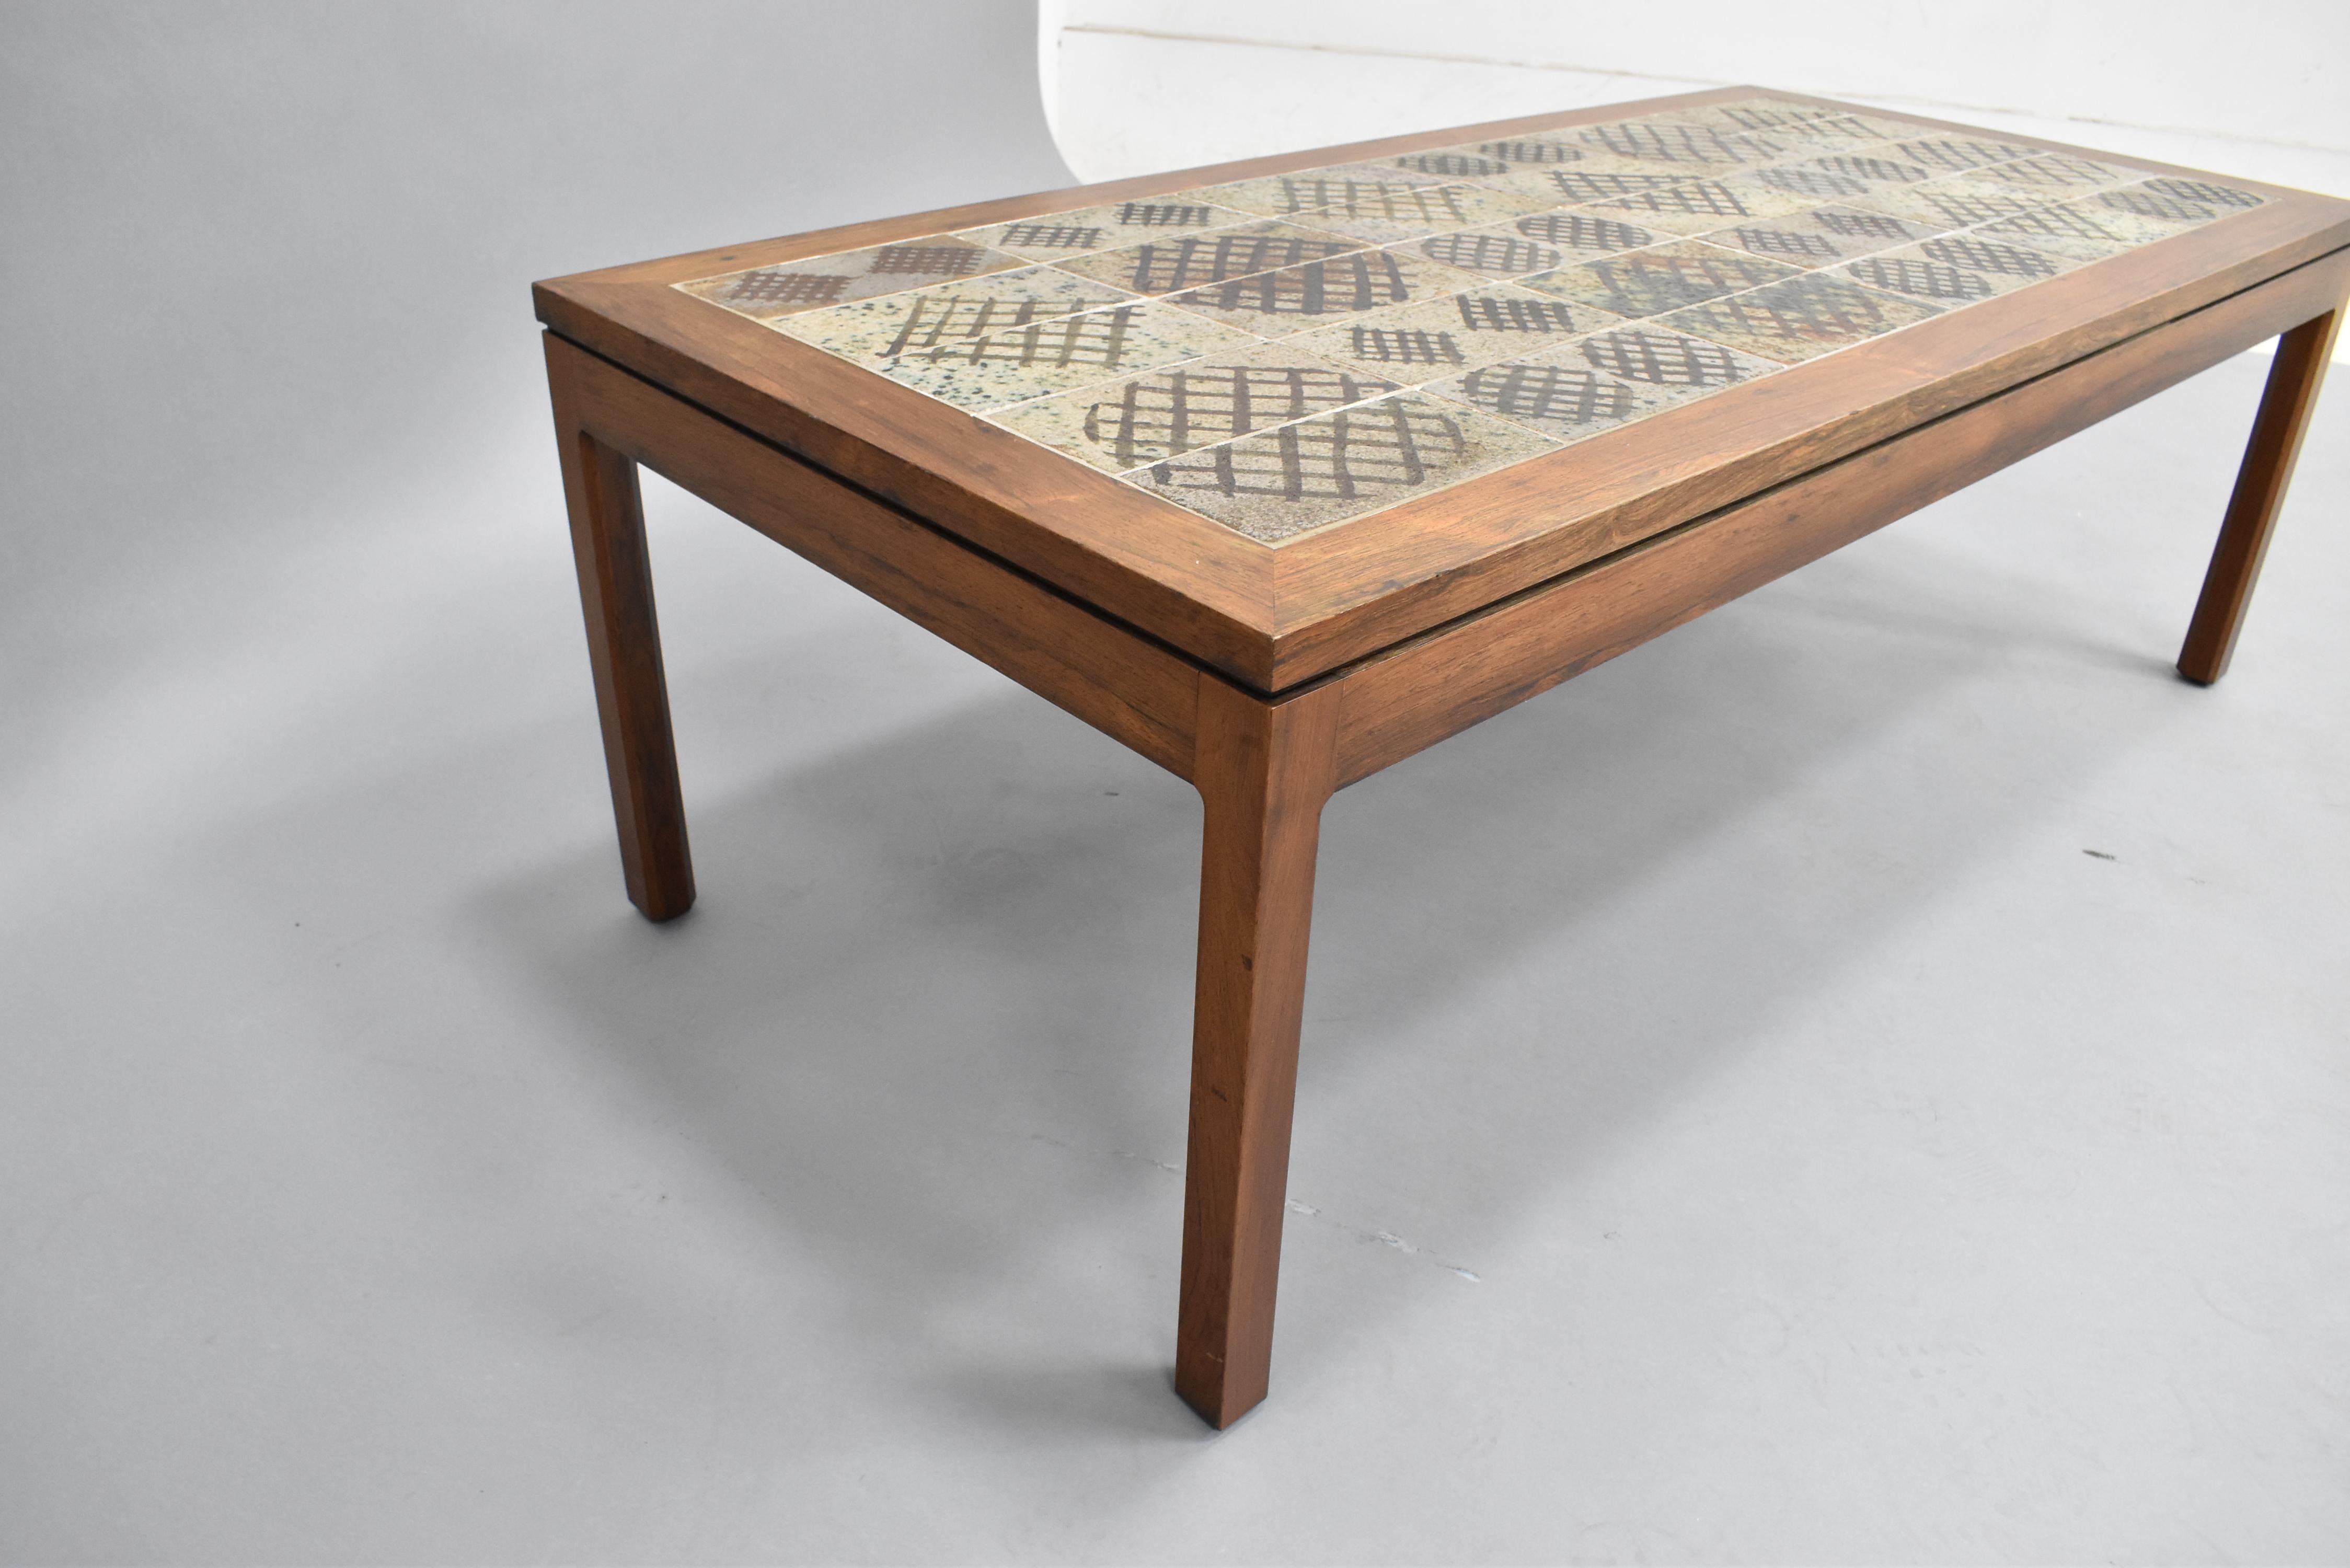 Vintage Rosewood and Tile Coffee Table In Good Condition For Sale In LOS ANGELES, CA